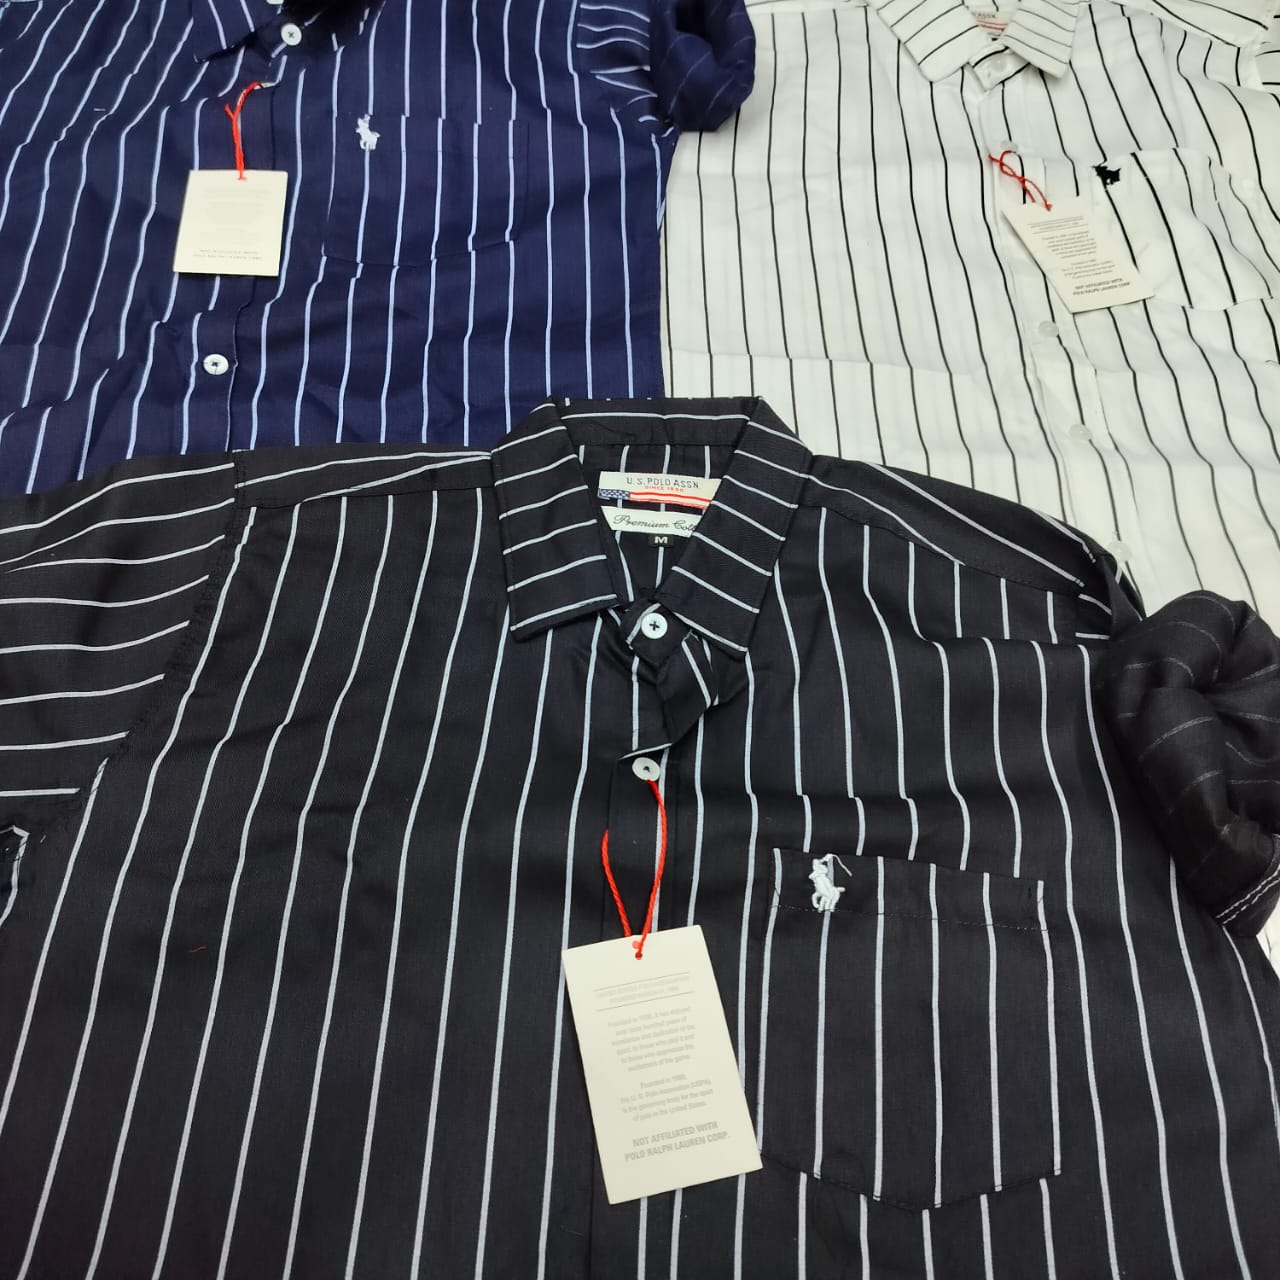 Details View - US POLO Shirt photos - reseller,reseller marketplace,advetising your products,reseller bazzar,resellerbazzar.in,india's classified site,US POLO Shirt | US POLO Shirt in surat | US POLO Shirt in vadodara | US POLO Shirt in Gujarat 